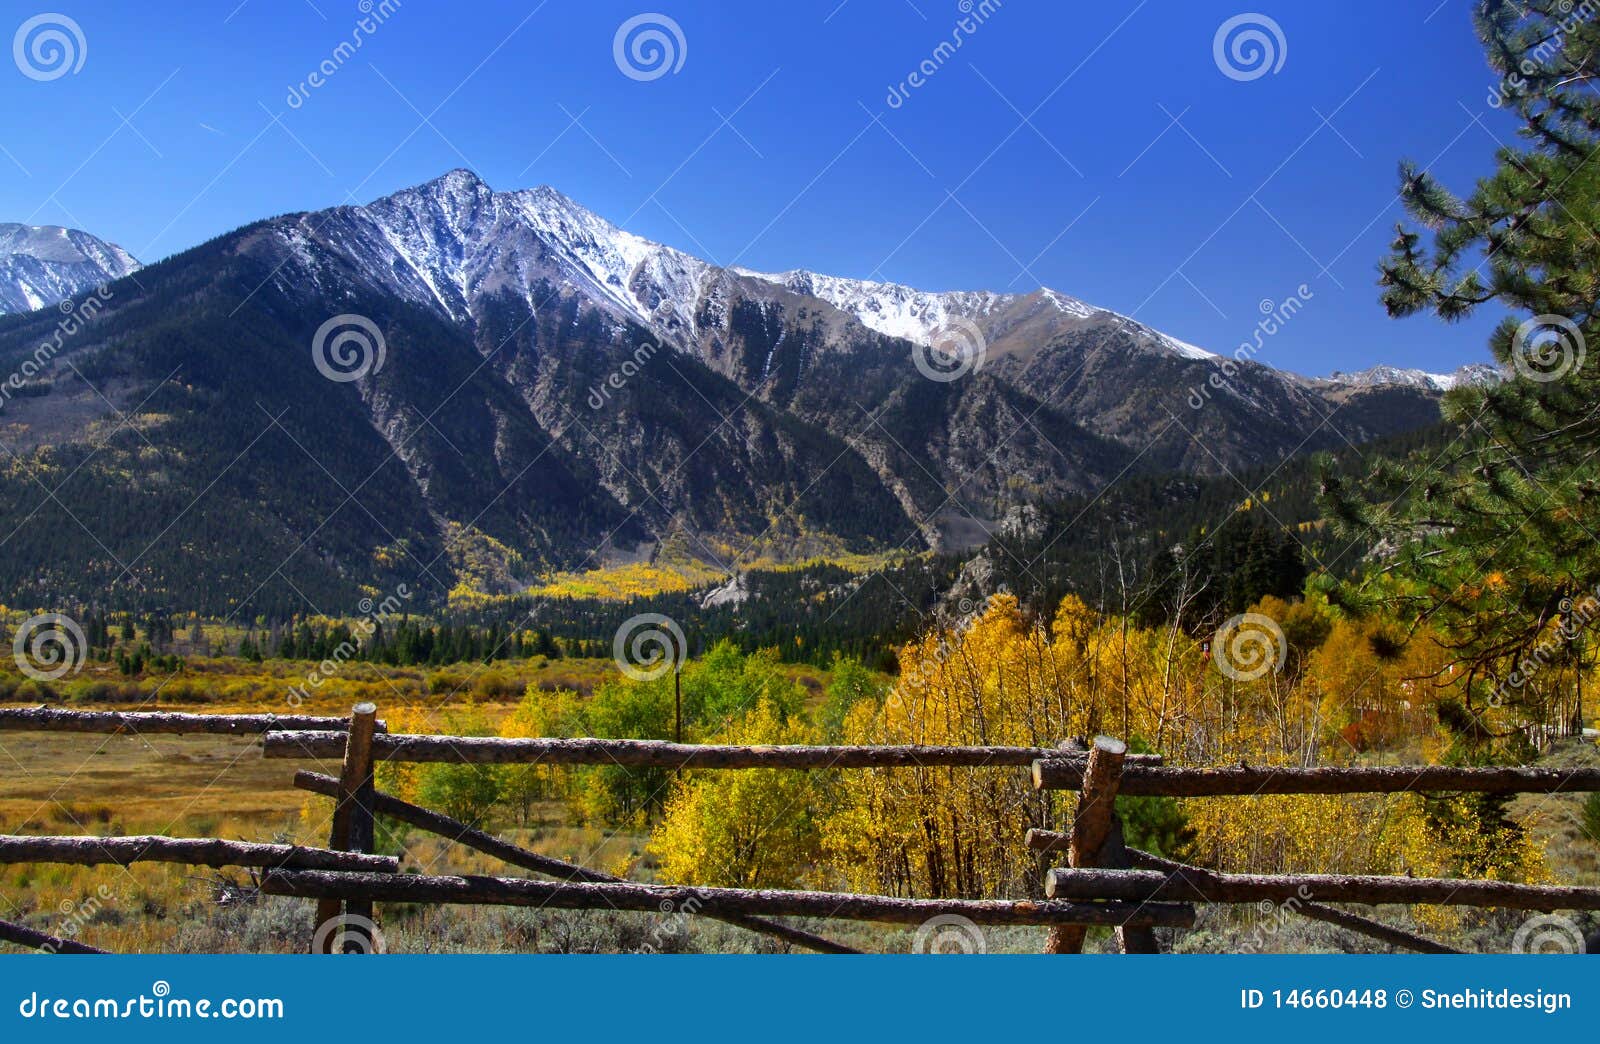 More similar stock images of ` Scenic landscape in Colorado `